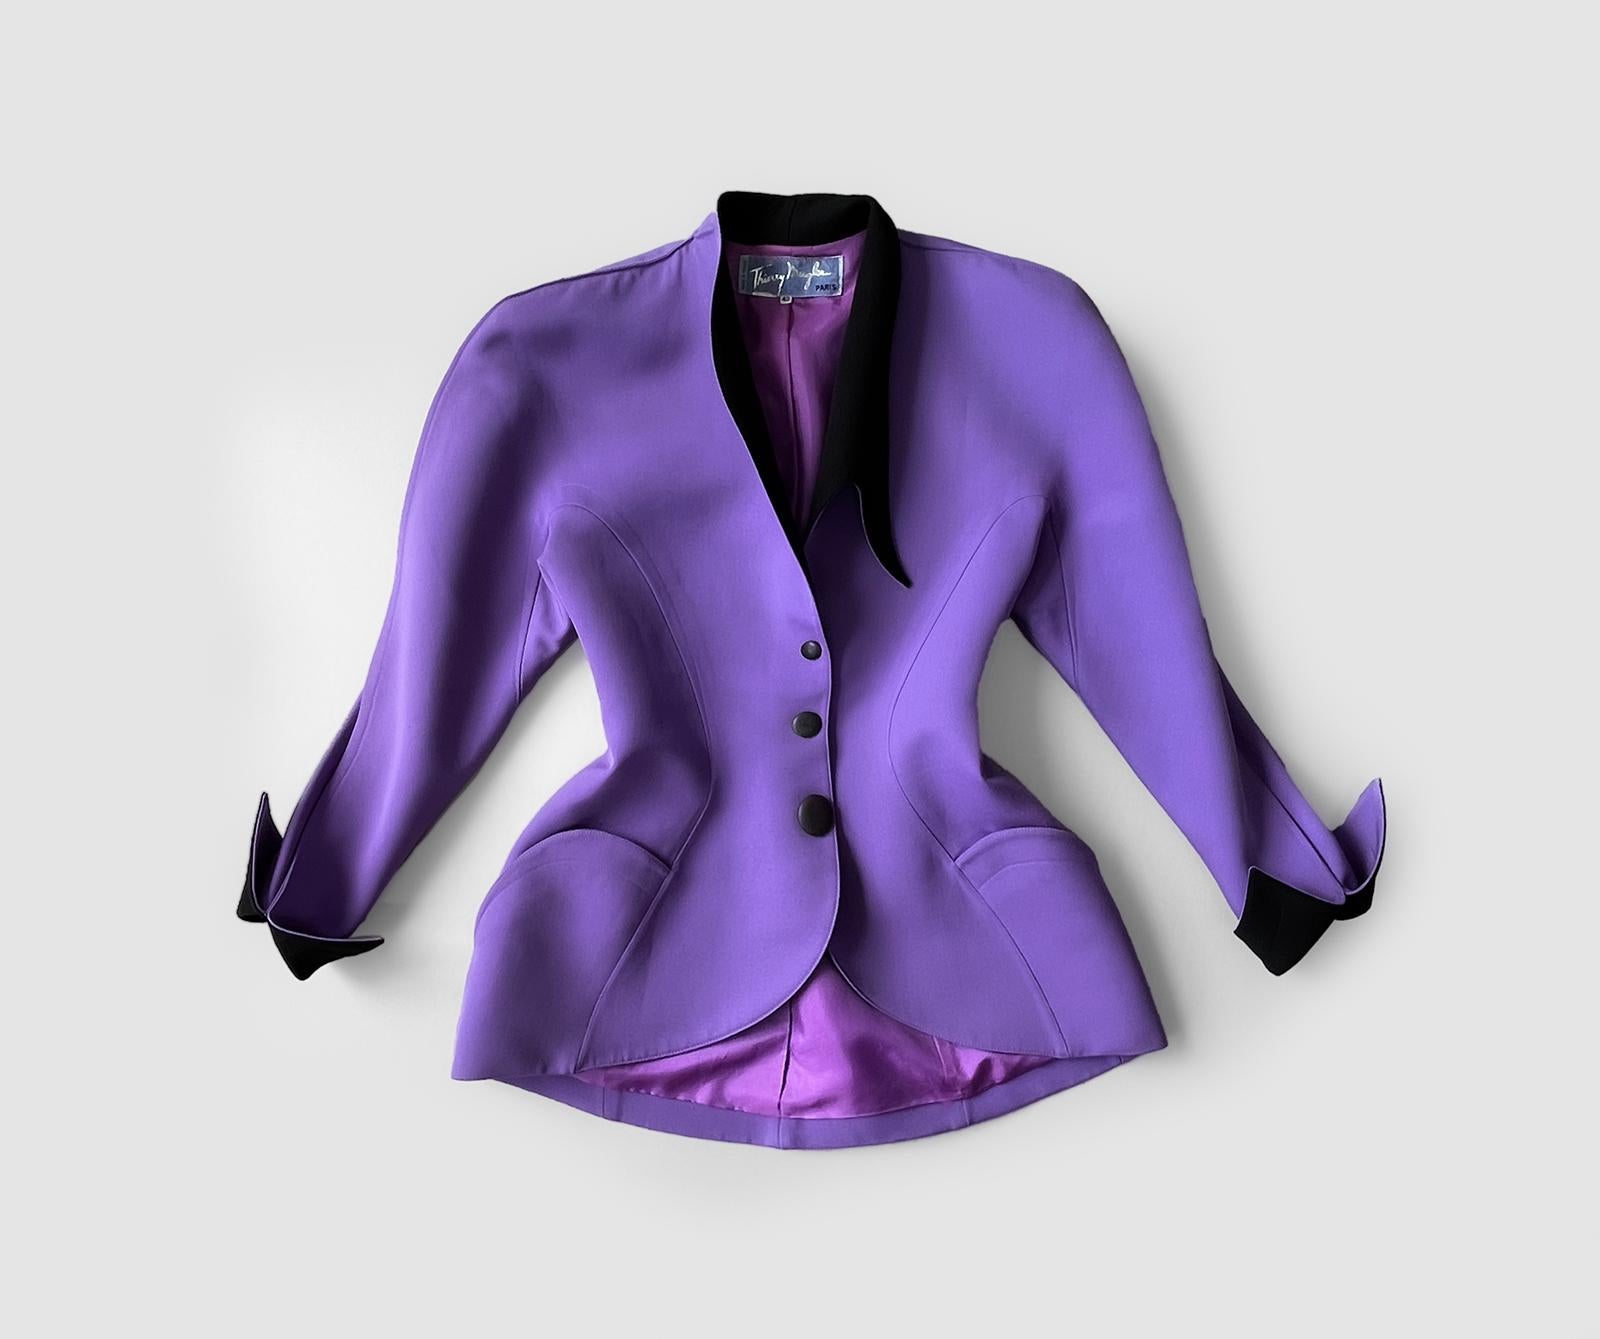 Thierry Mugler FW1989 Archival Sculptural Jacket  Dramatic Iman Purple / Violet  For Sale 2